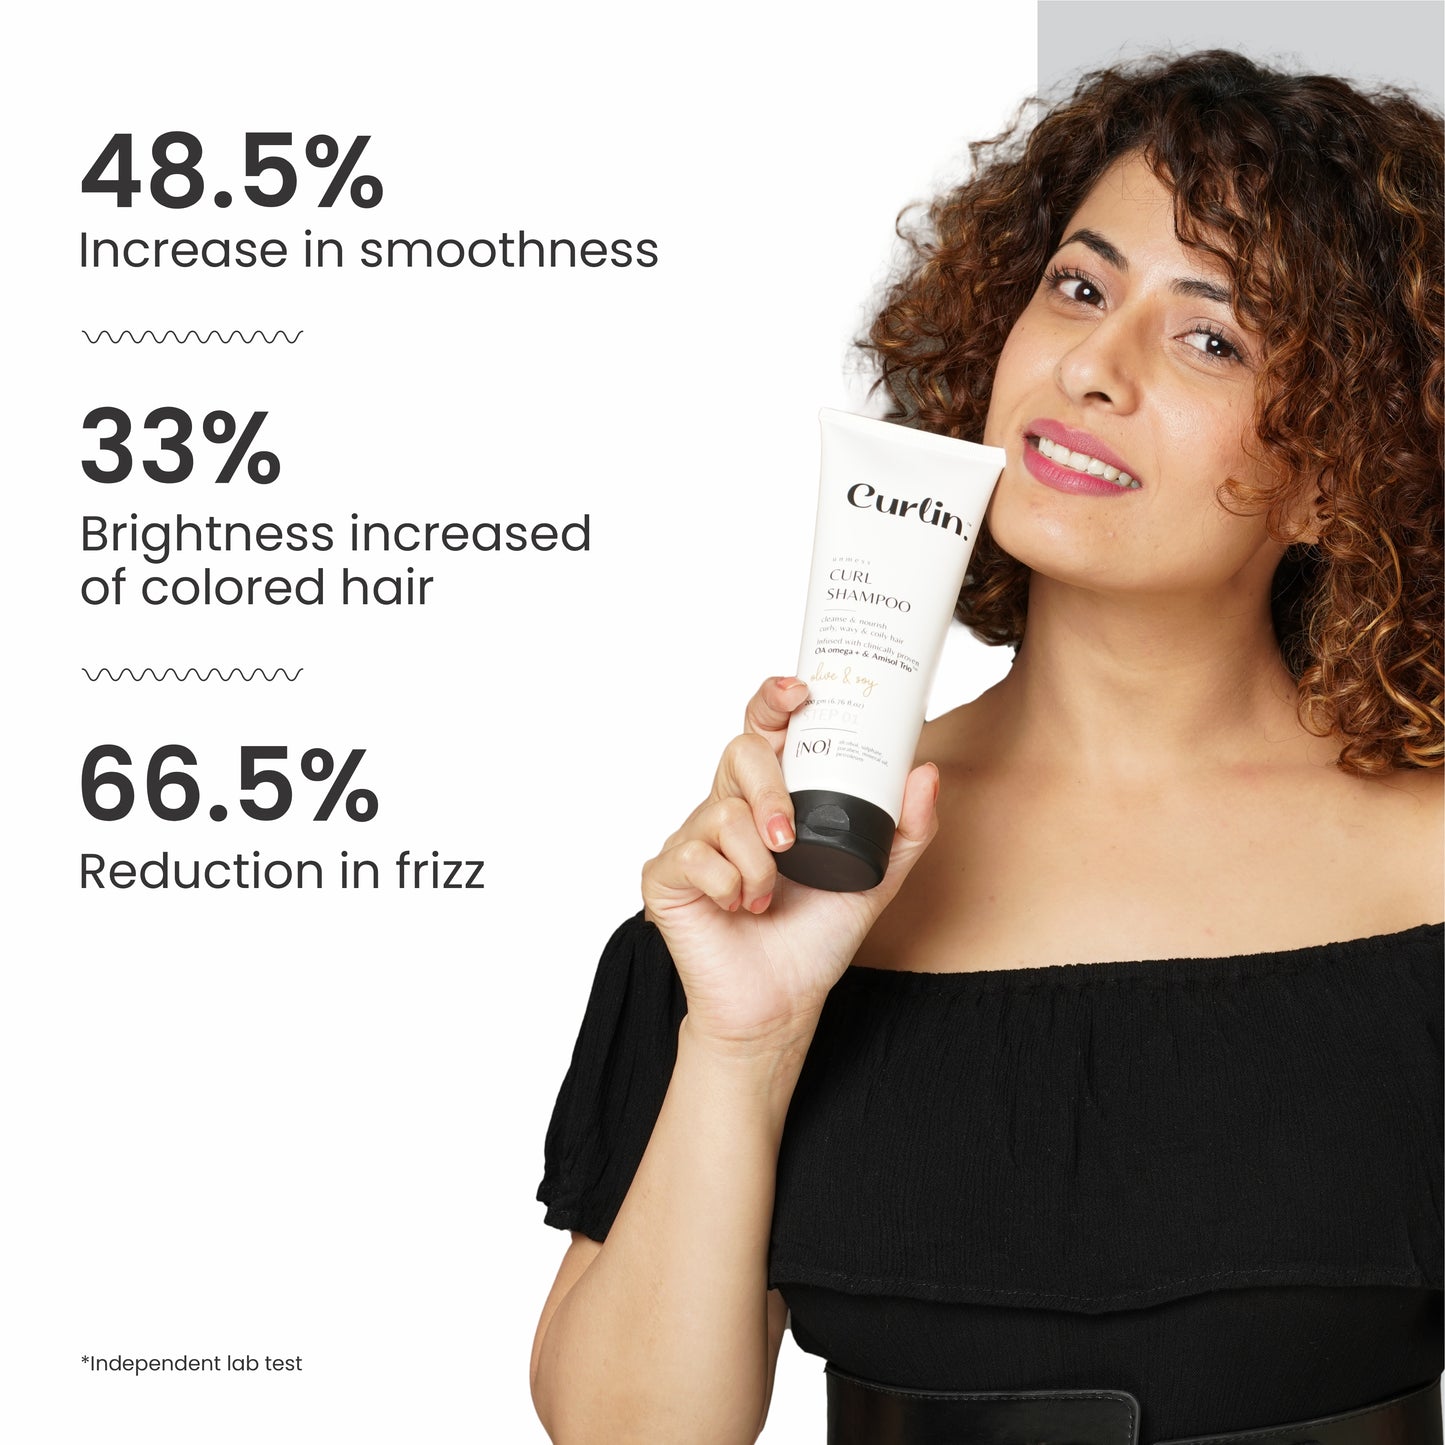 Frizz Control and Scalp Cleansing Shampoo for curly and wavy hair | Sulphate, Paraben, Alcohol Free